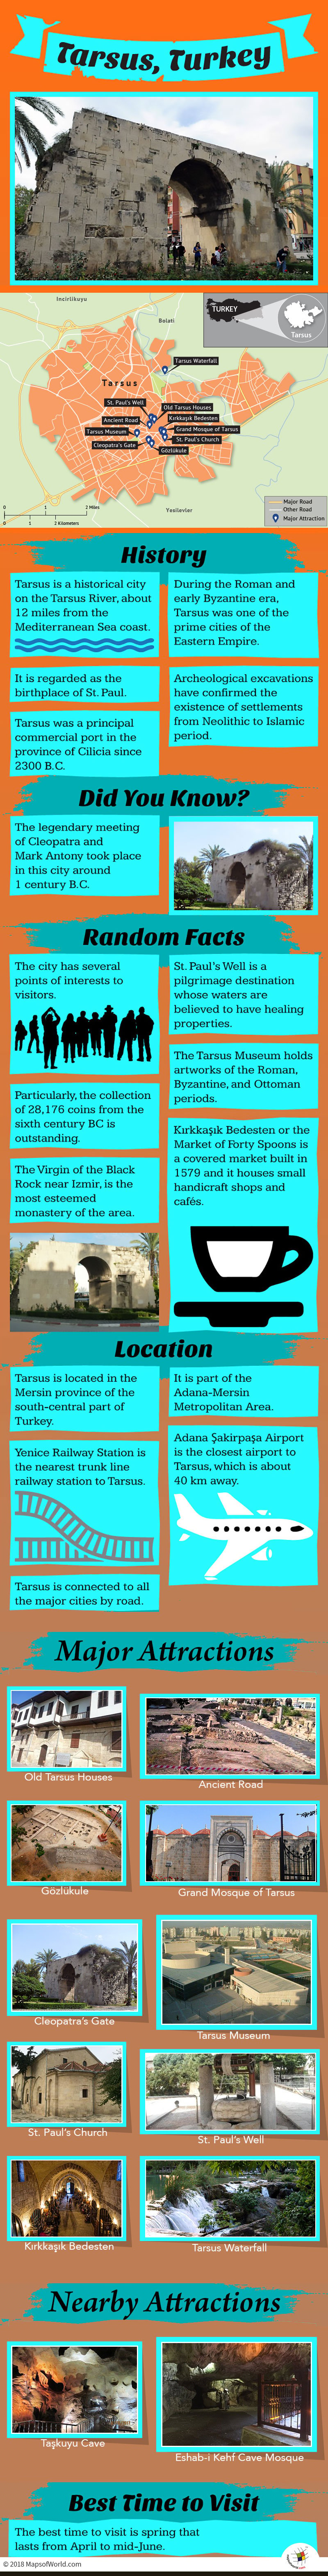 Infographic Depicting Tarsus Tourist Attractions